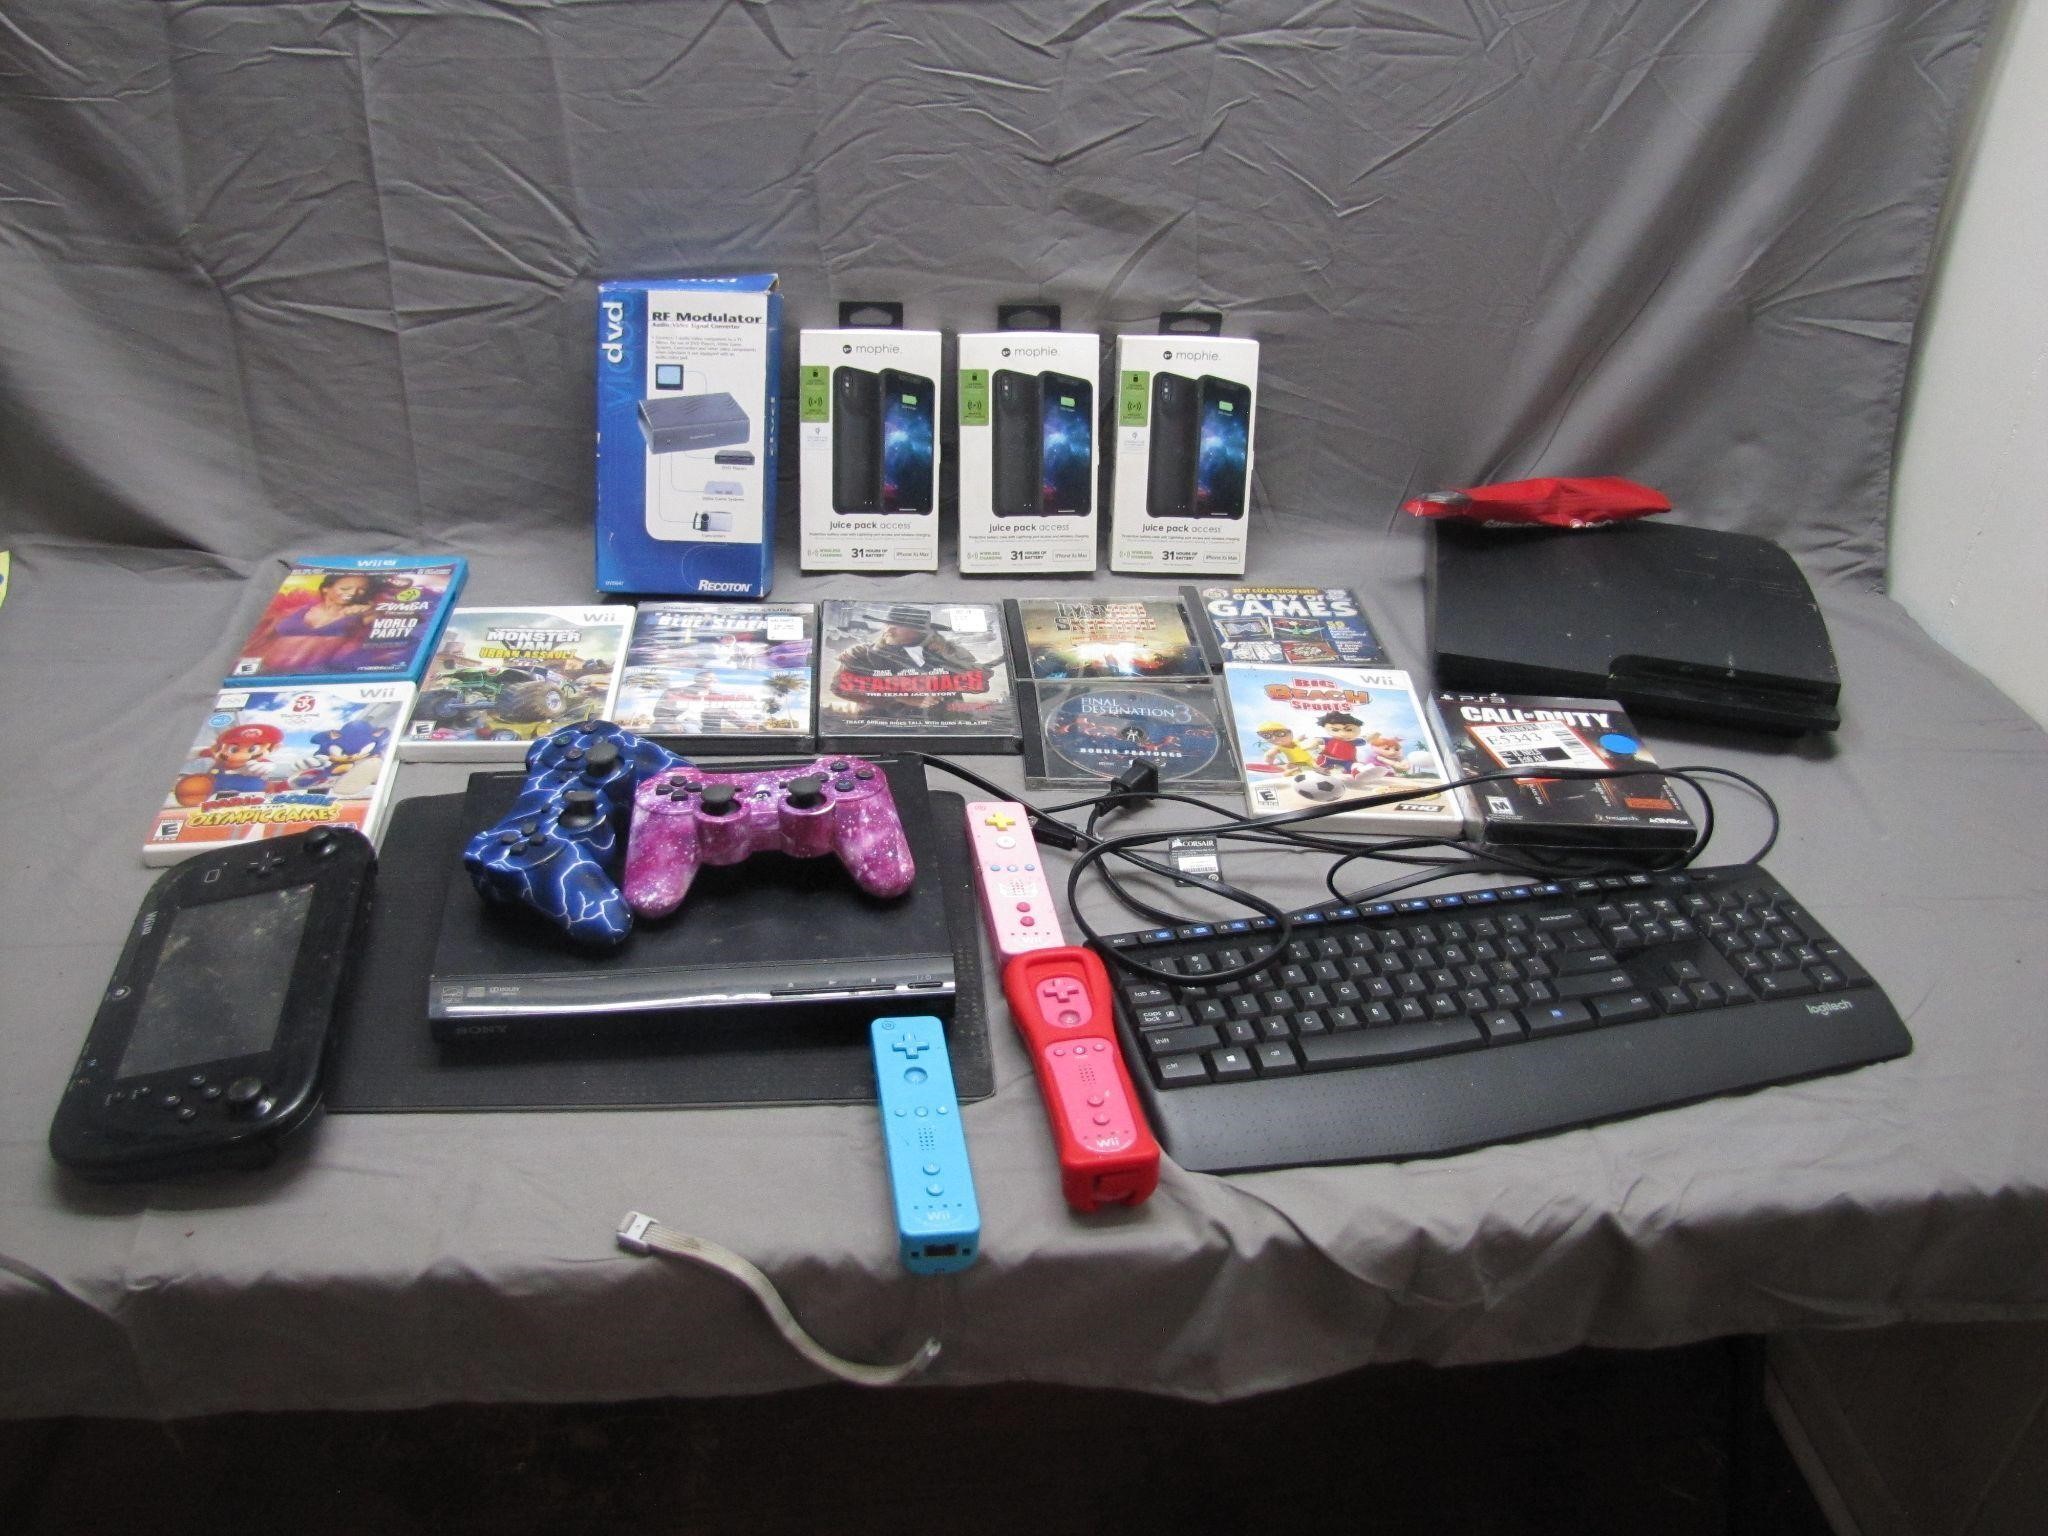 Assorted Gaming Electronics & Video Games